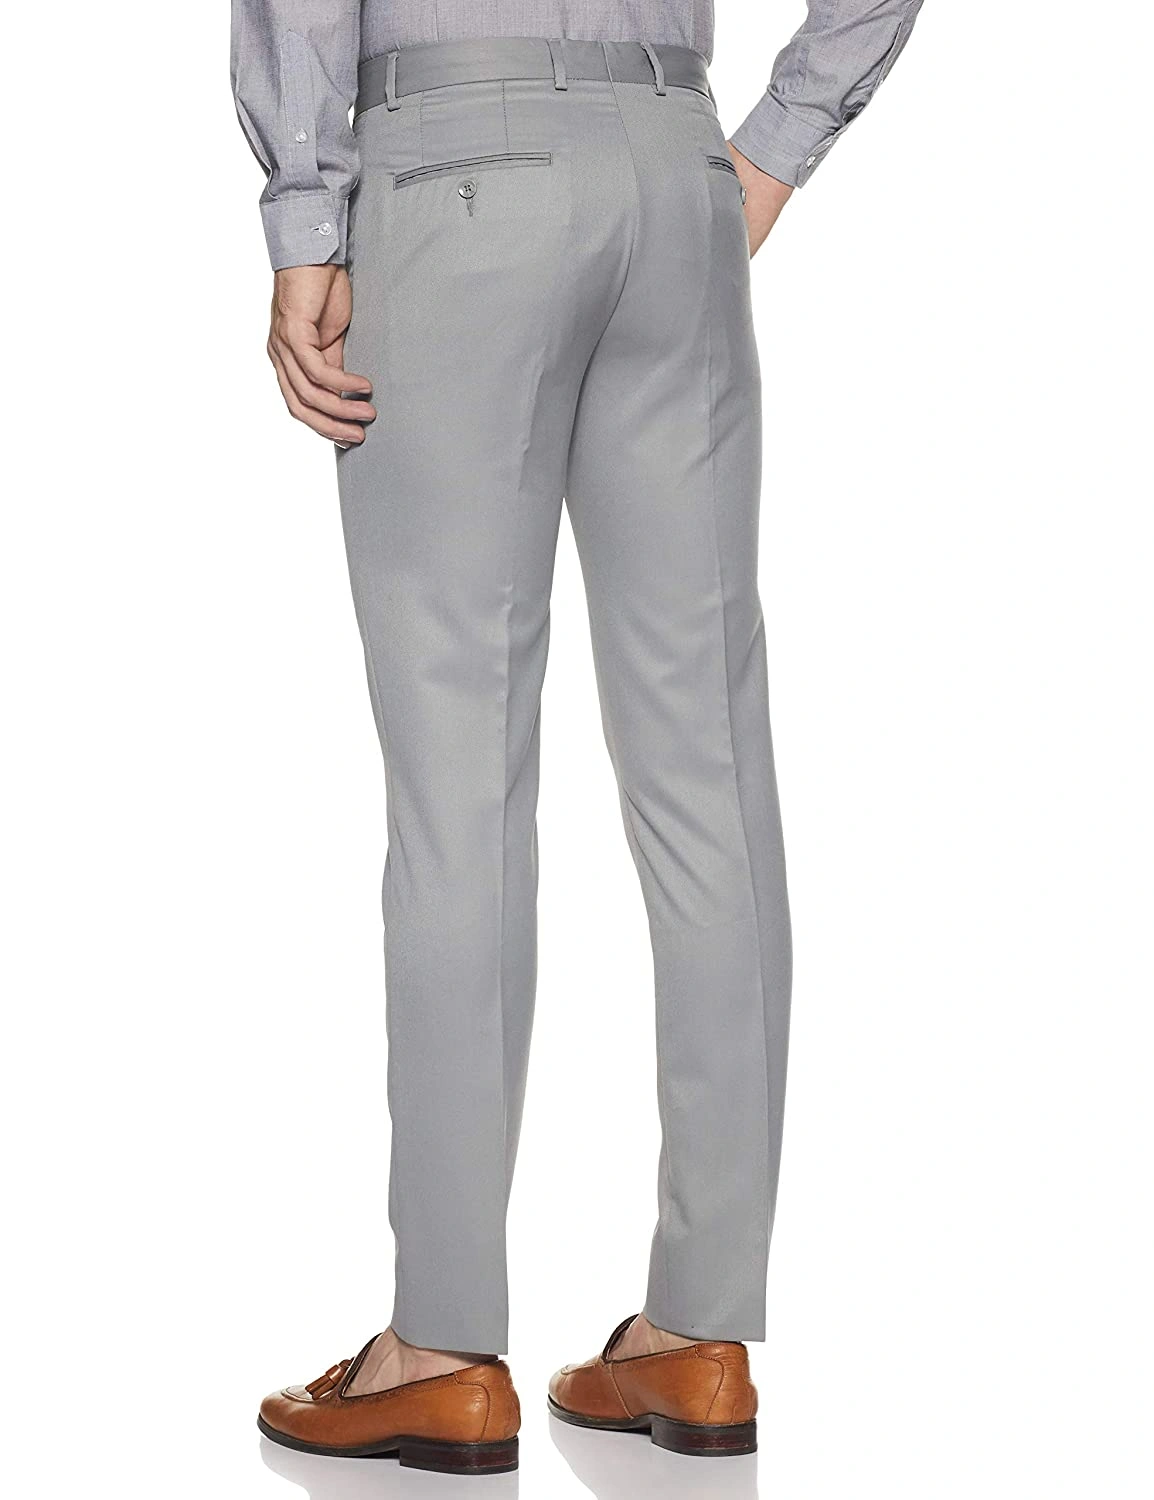 Buy LOUIS PHILIPPE Ltgrey Men's Slim Fit Solid Trousers | Shoppers Stop